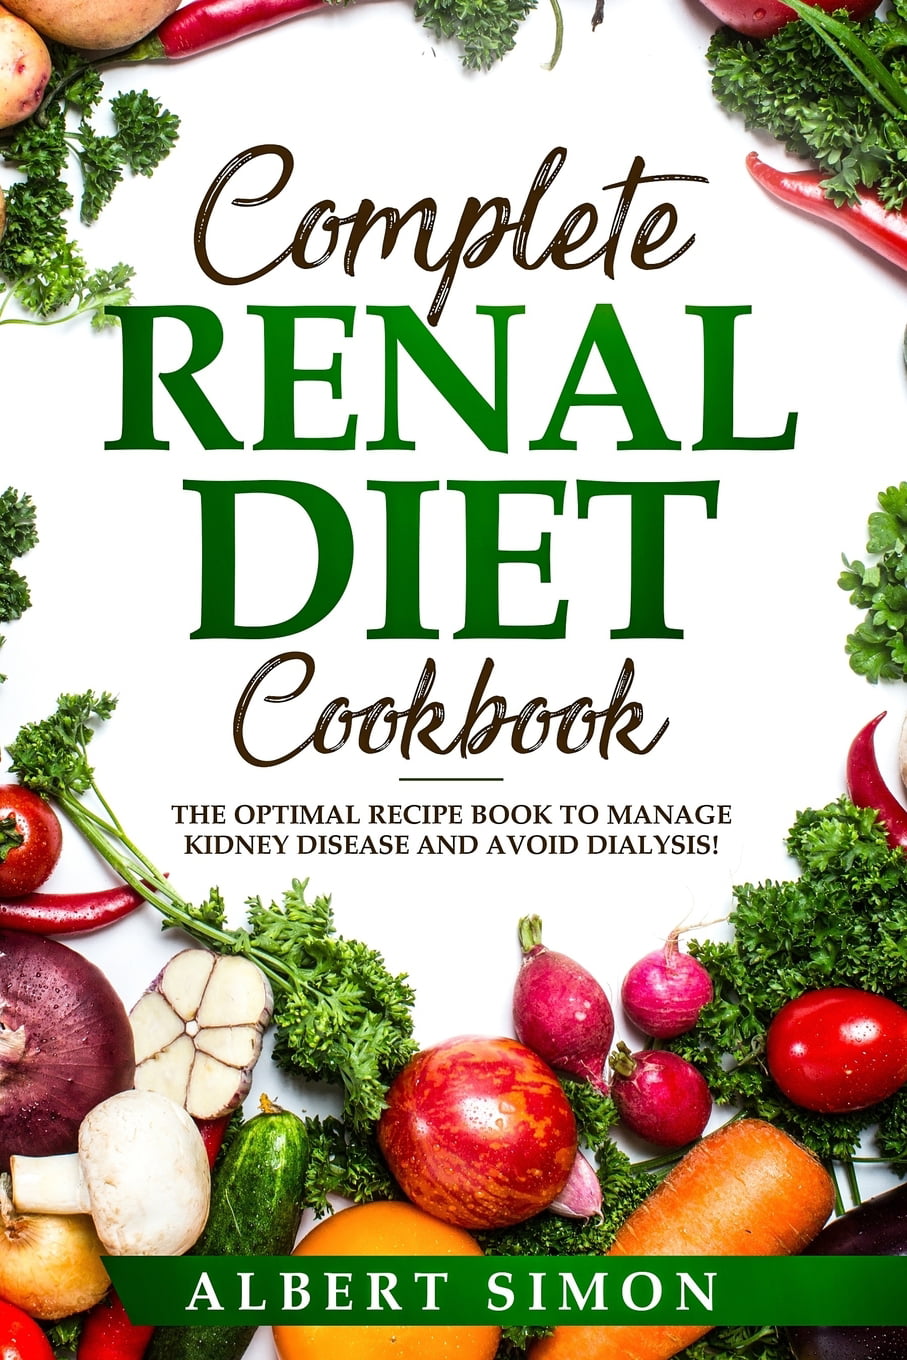 Complete Renal Diet Cookbook: The Optimal Recipe Book to Manage Kidney